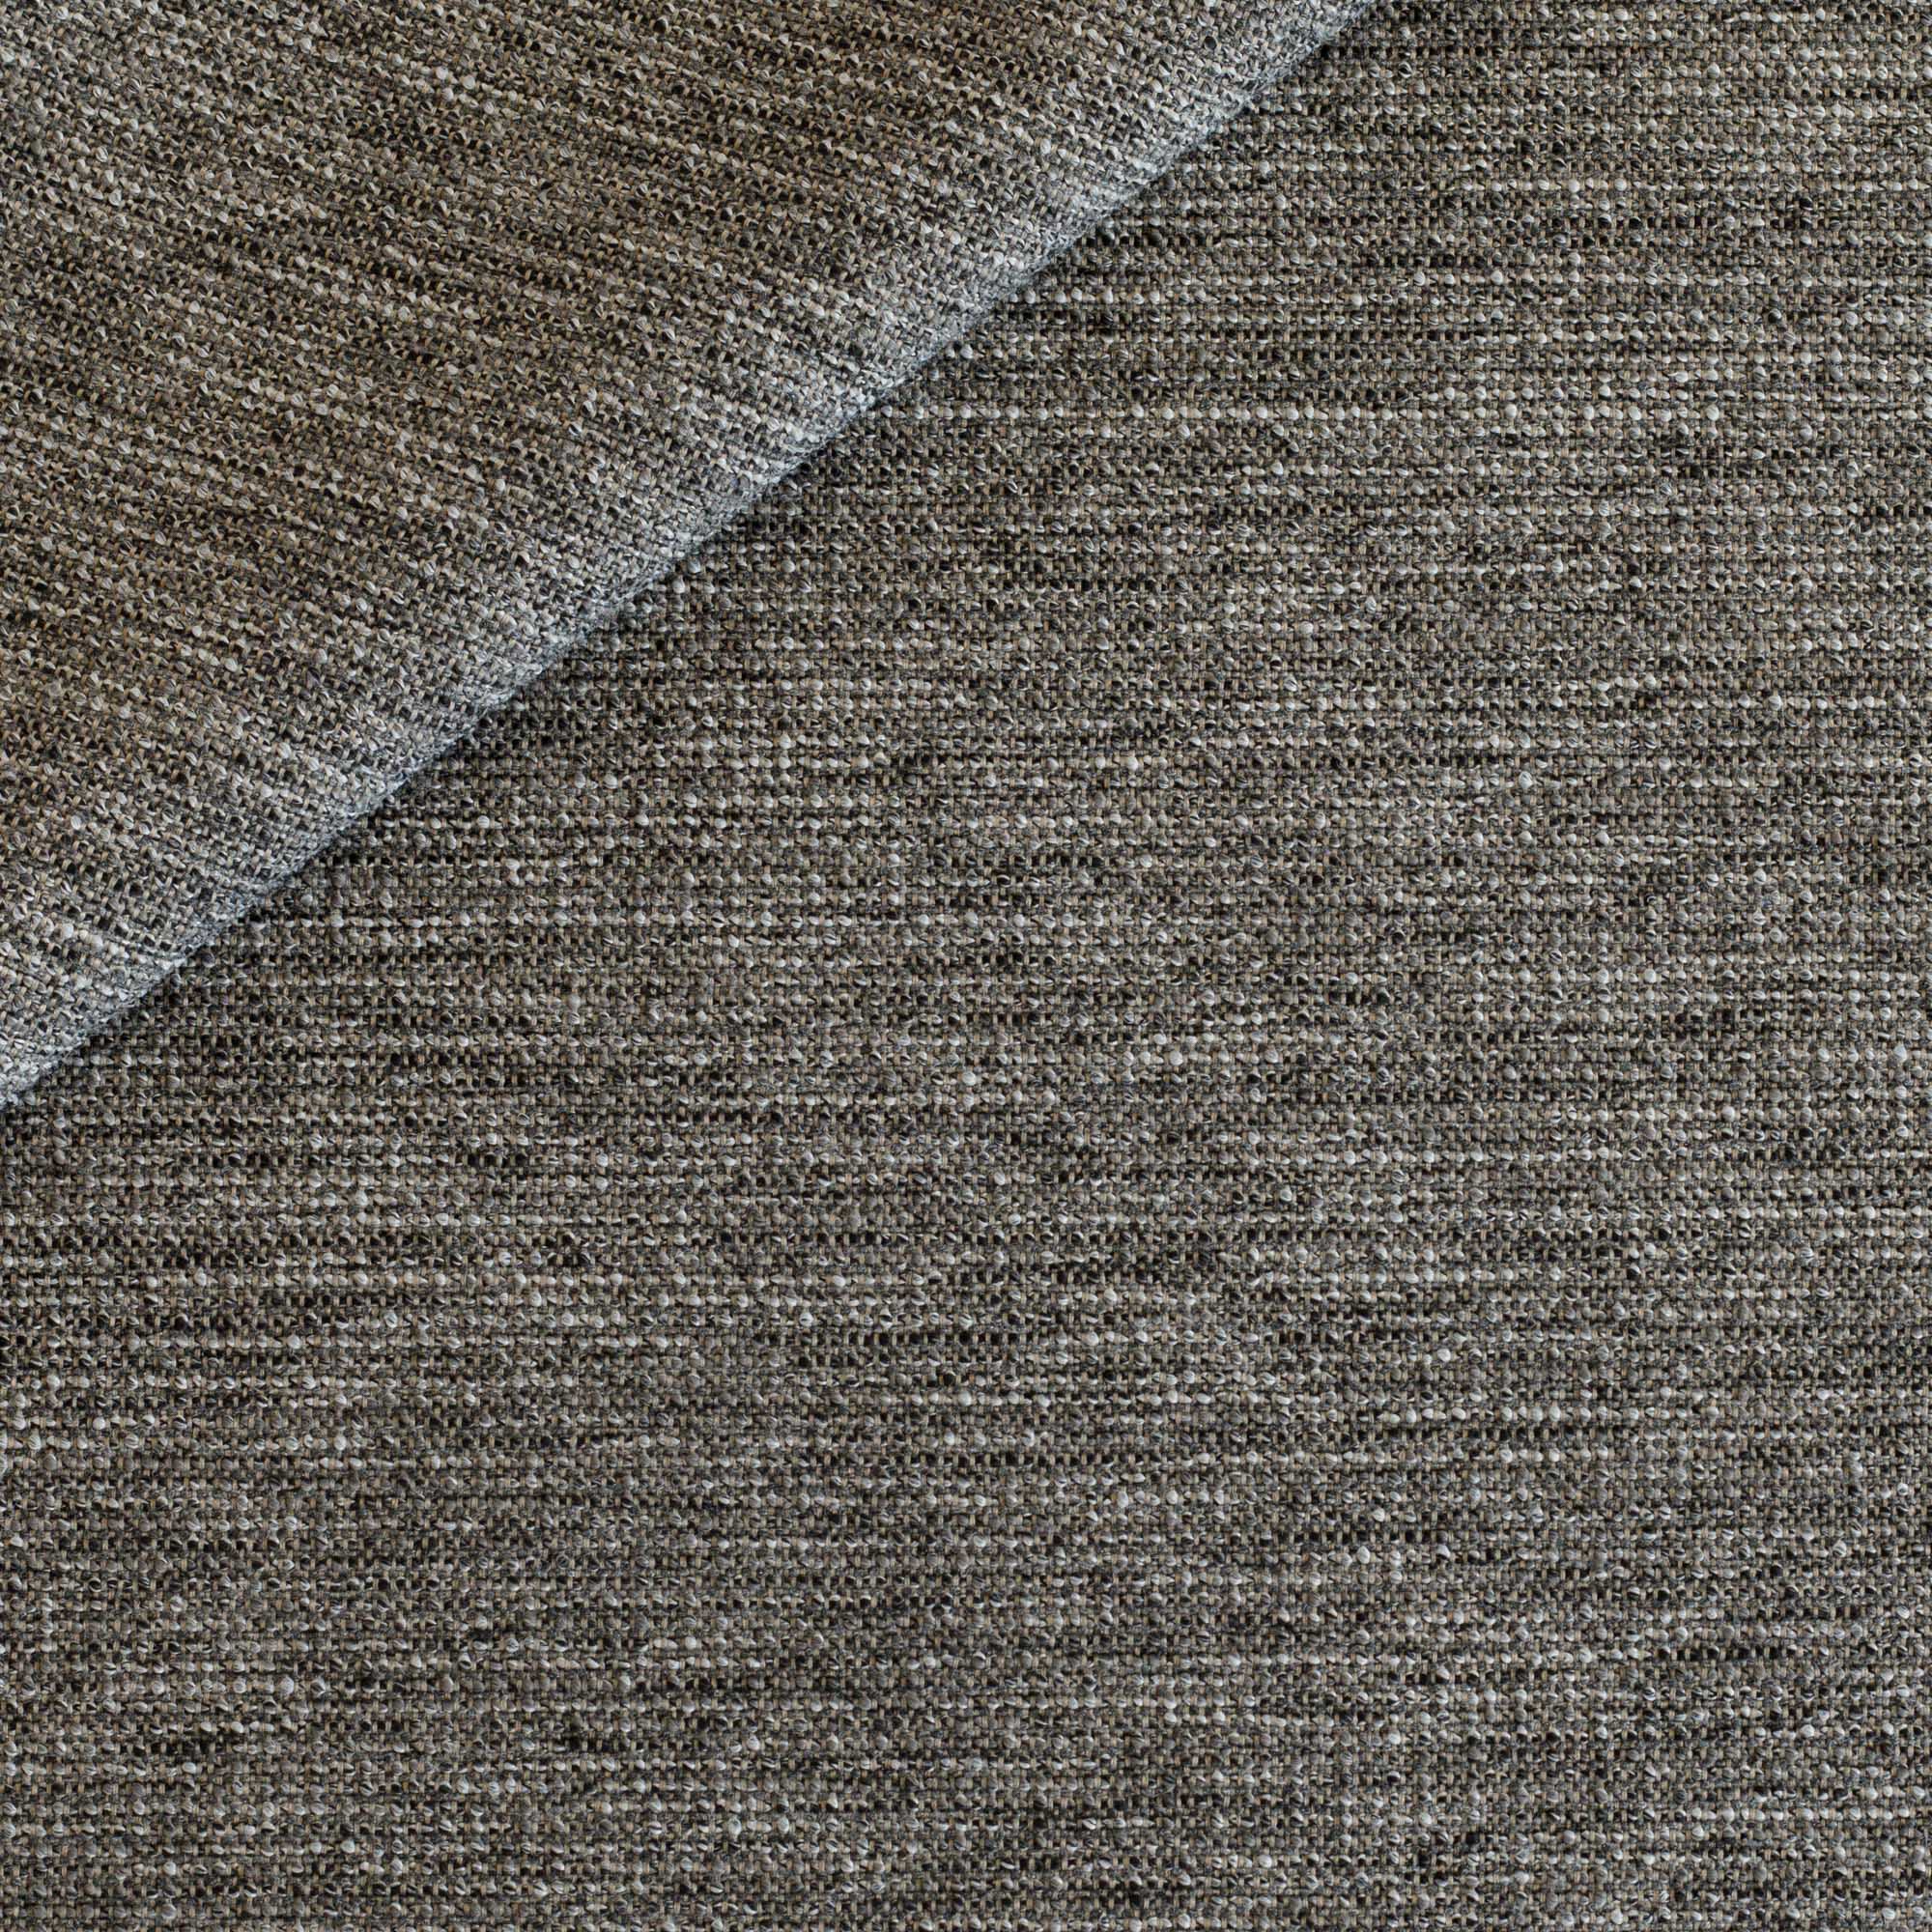 a charcoal grey and dark brown high performance upholstery fabric